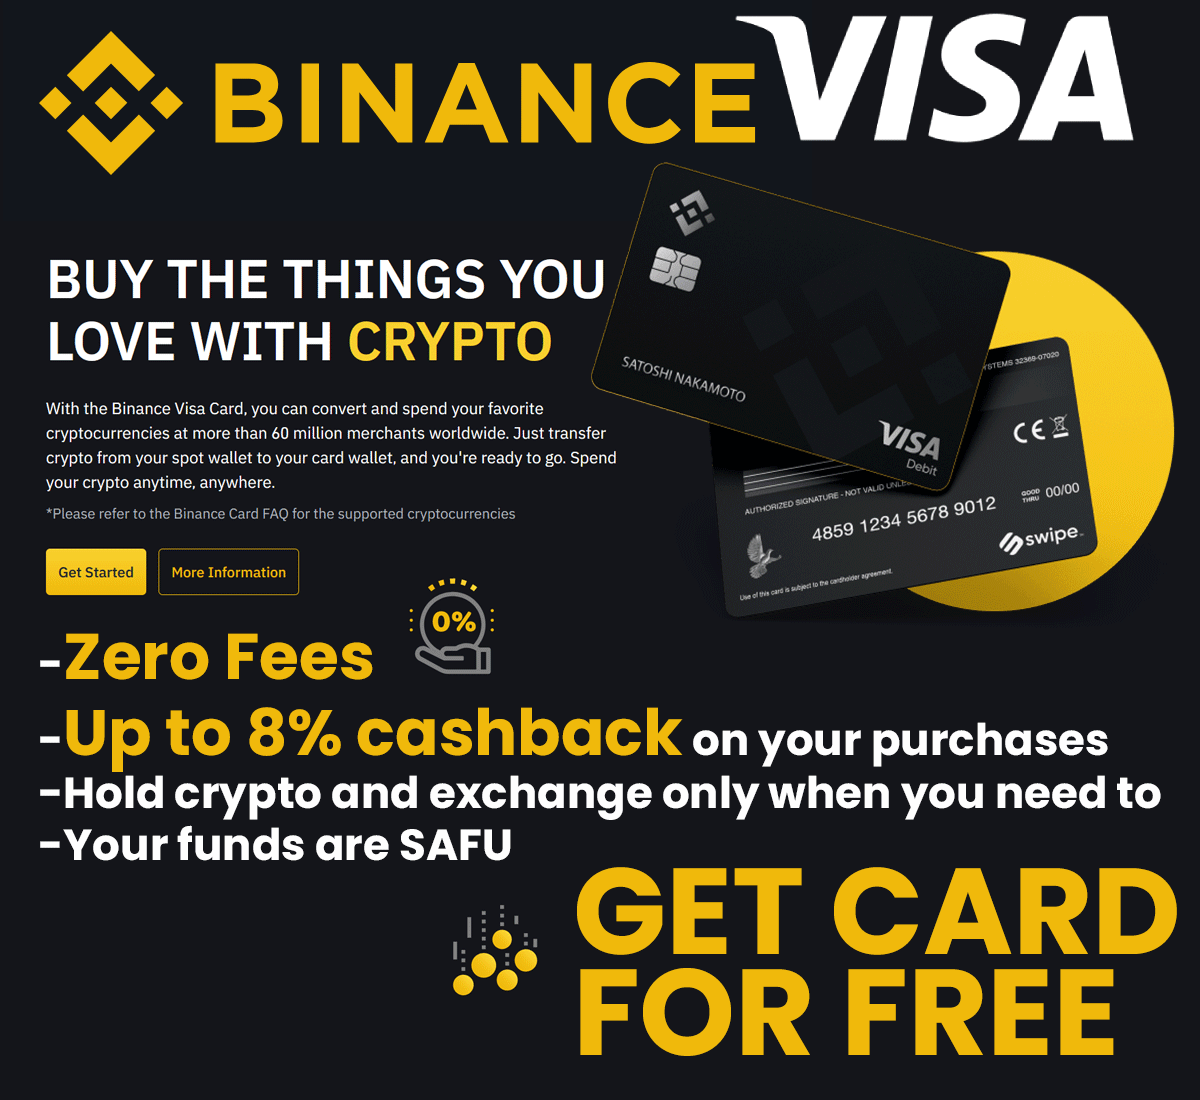 GET CARD FOR FREE NOW!